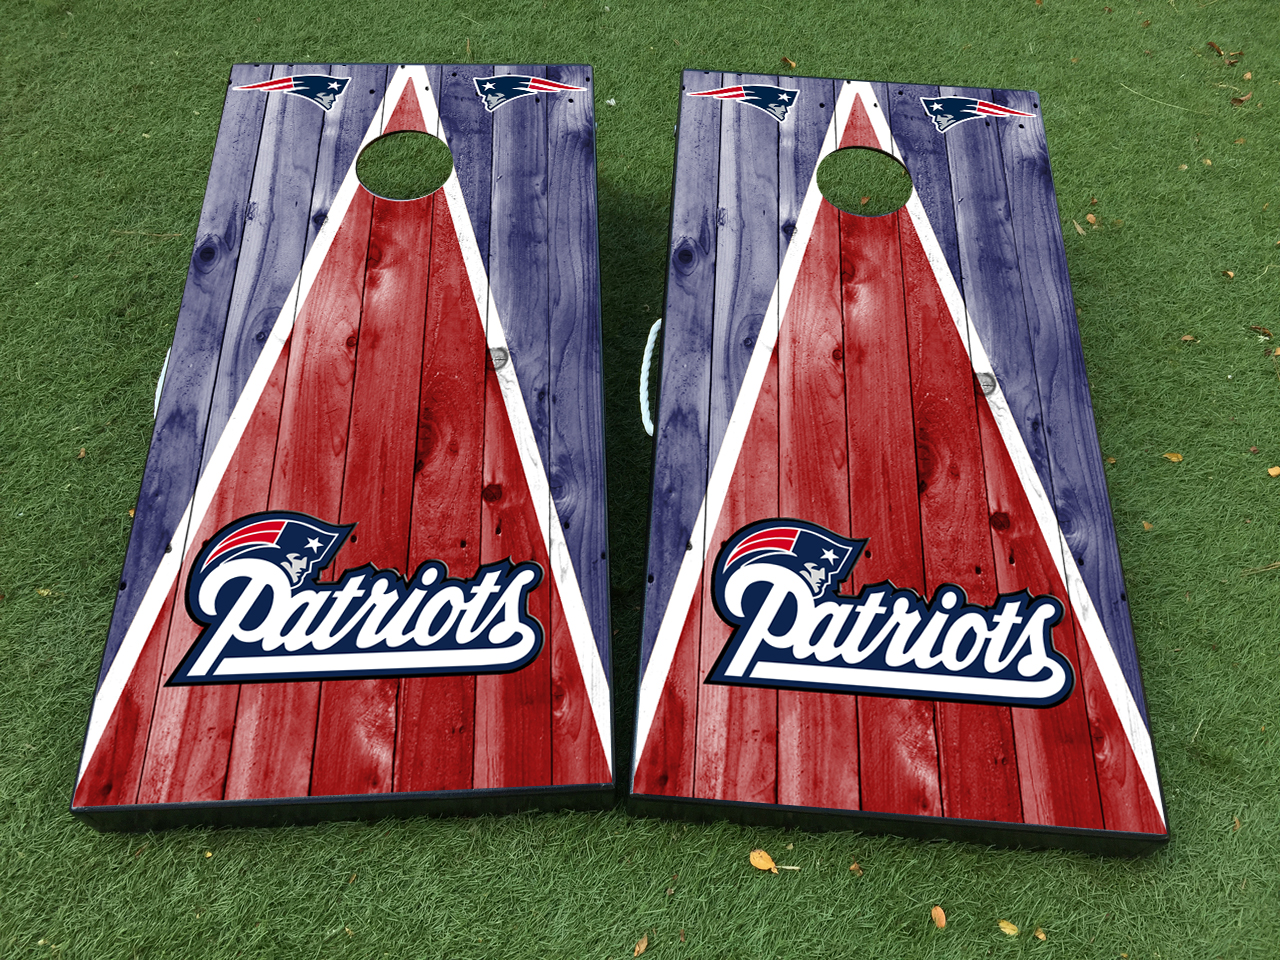 New England Patriots cornhole board or vehicle decal s